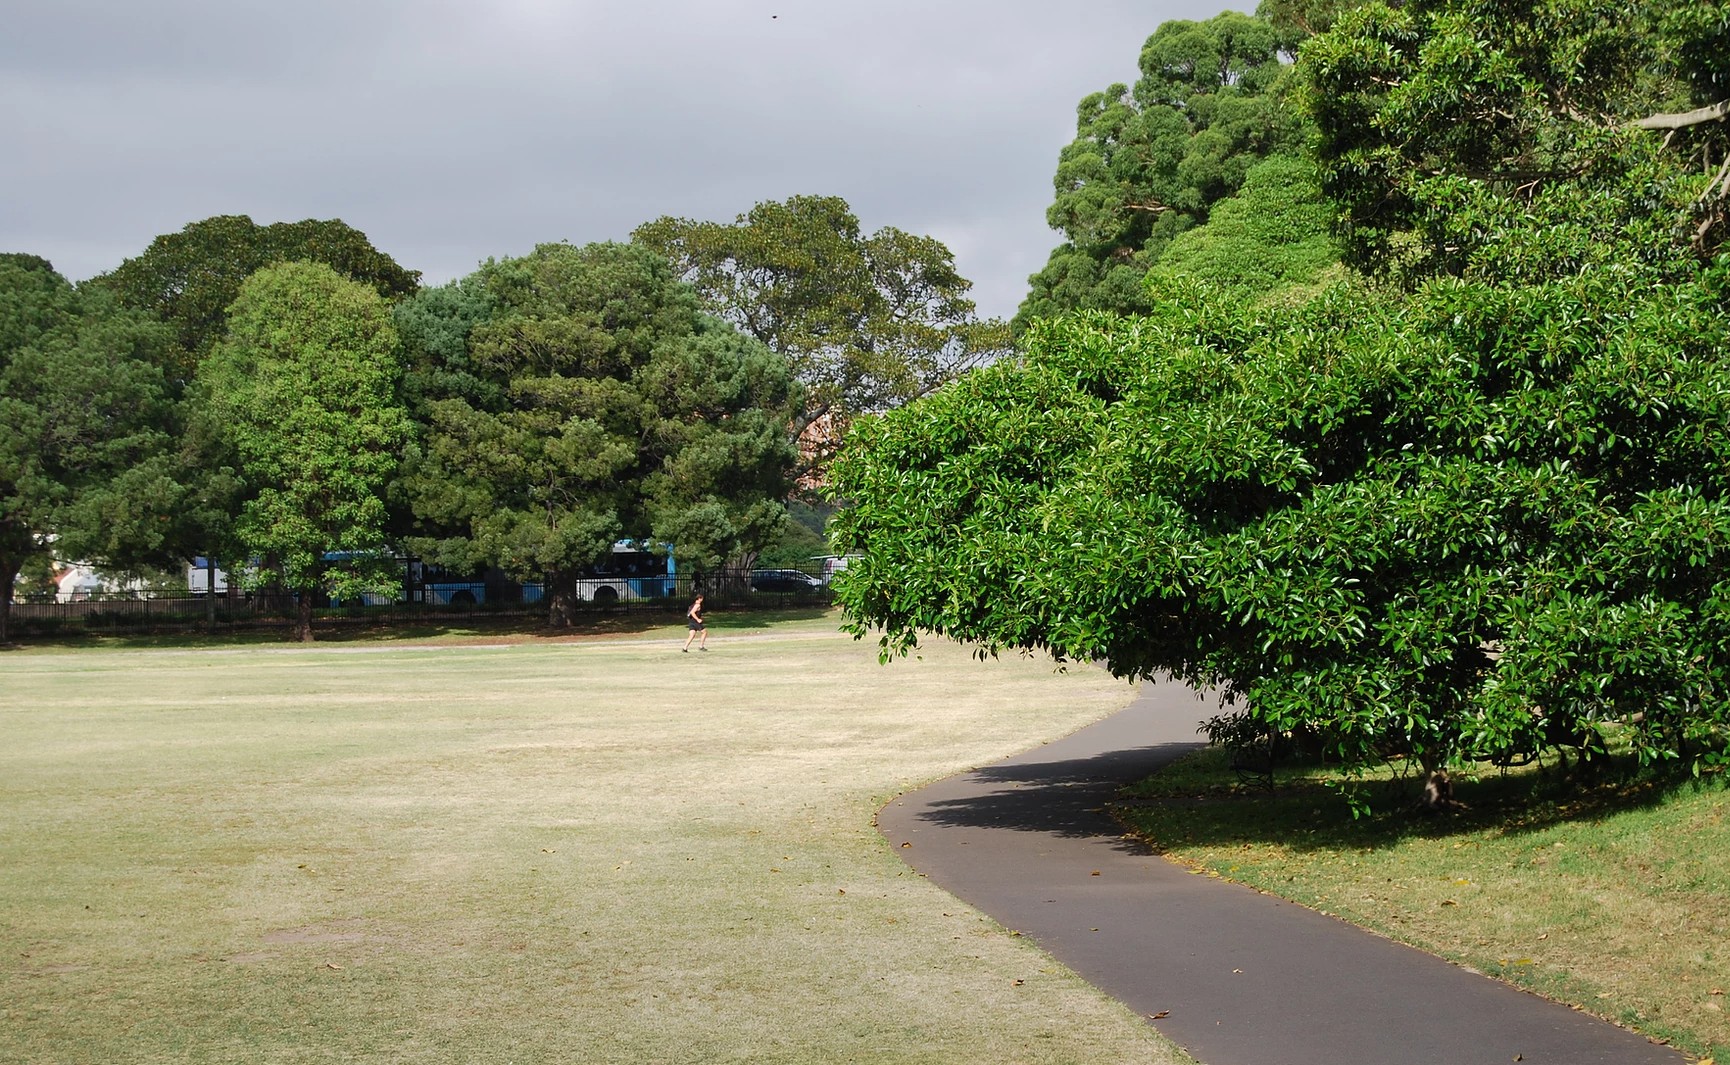 Areas of grass car parking to cease at Moore Park